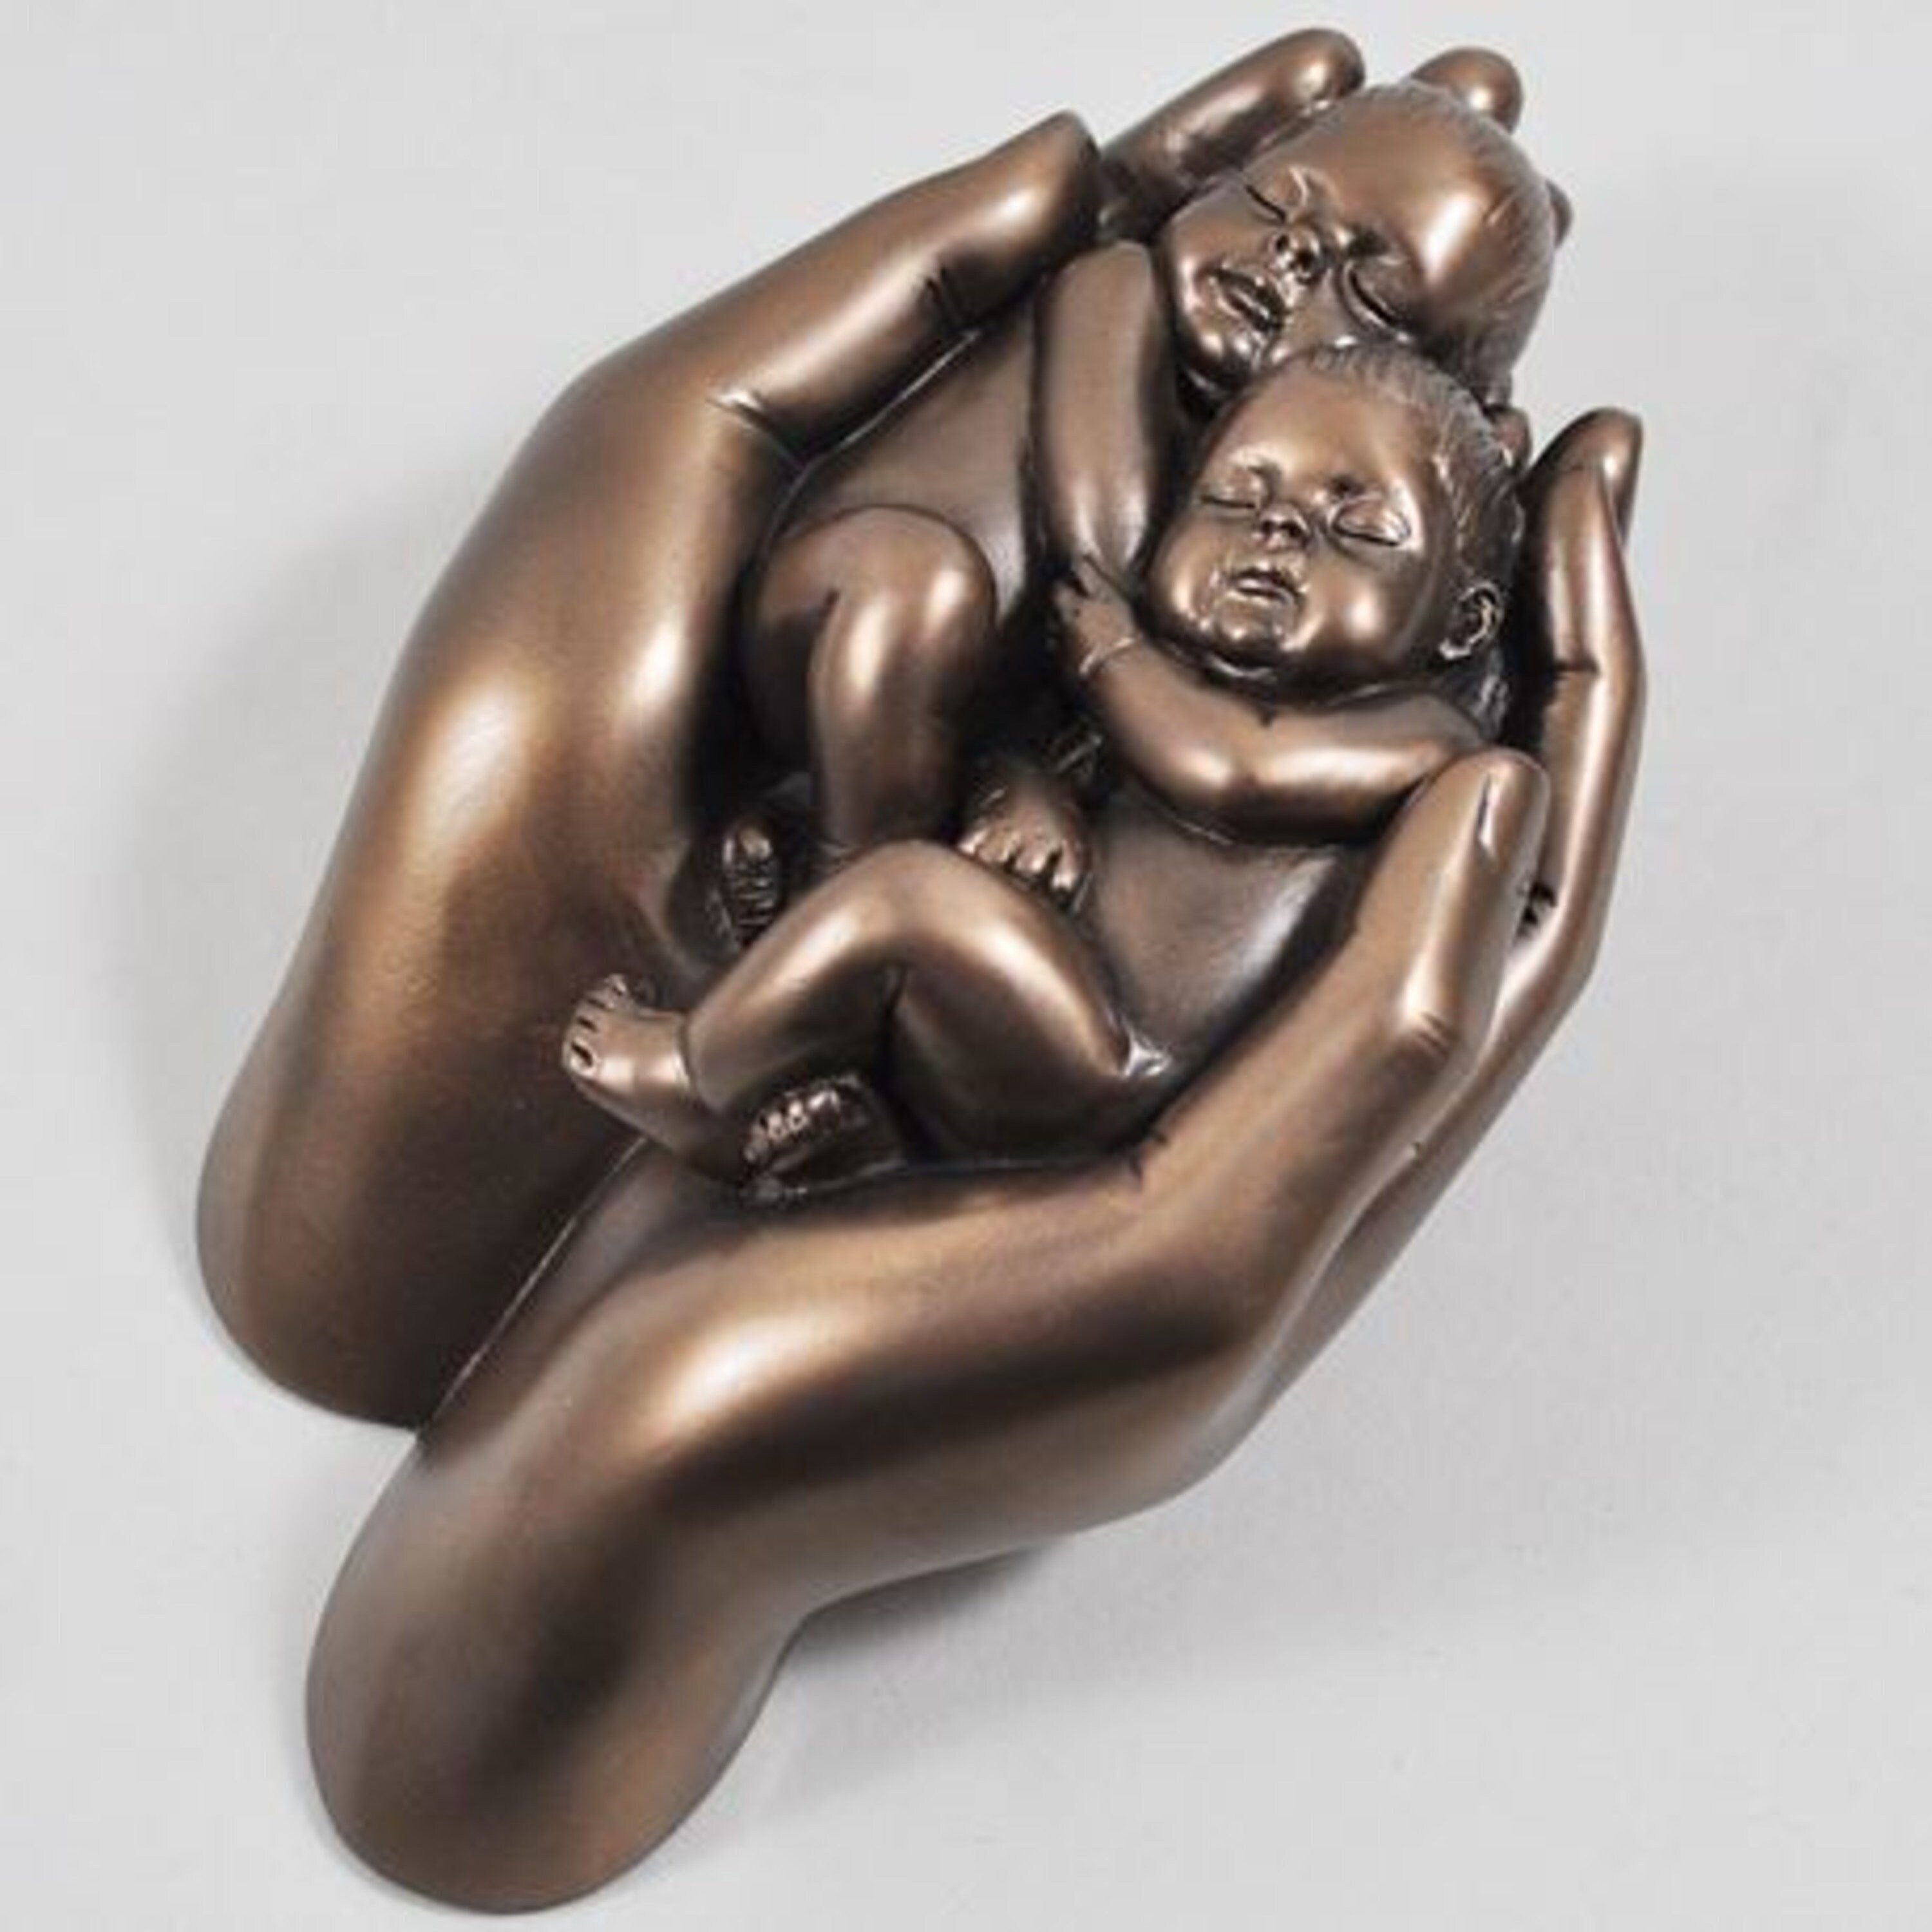 Babies in Hand Cold Cast Bronze Sculpture by Love is Blue